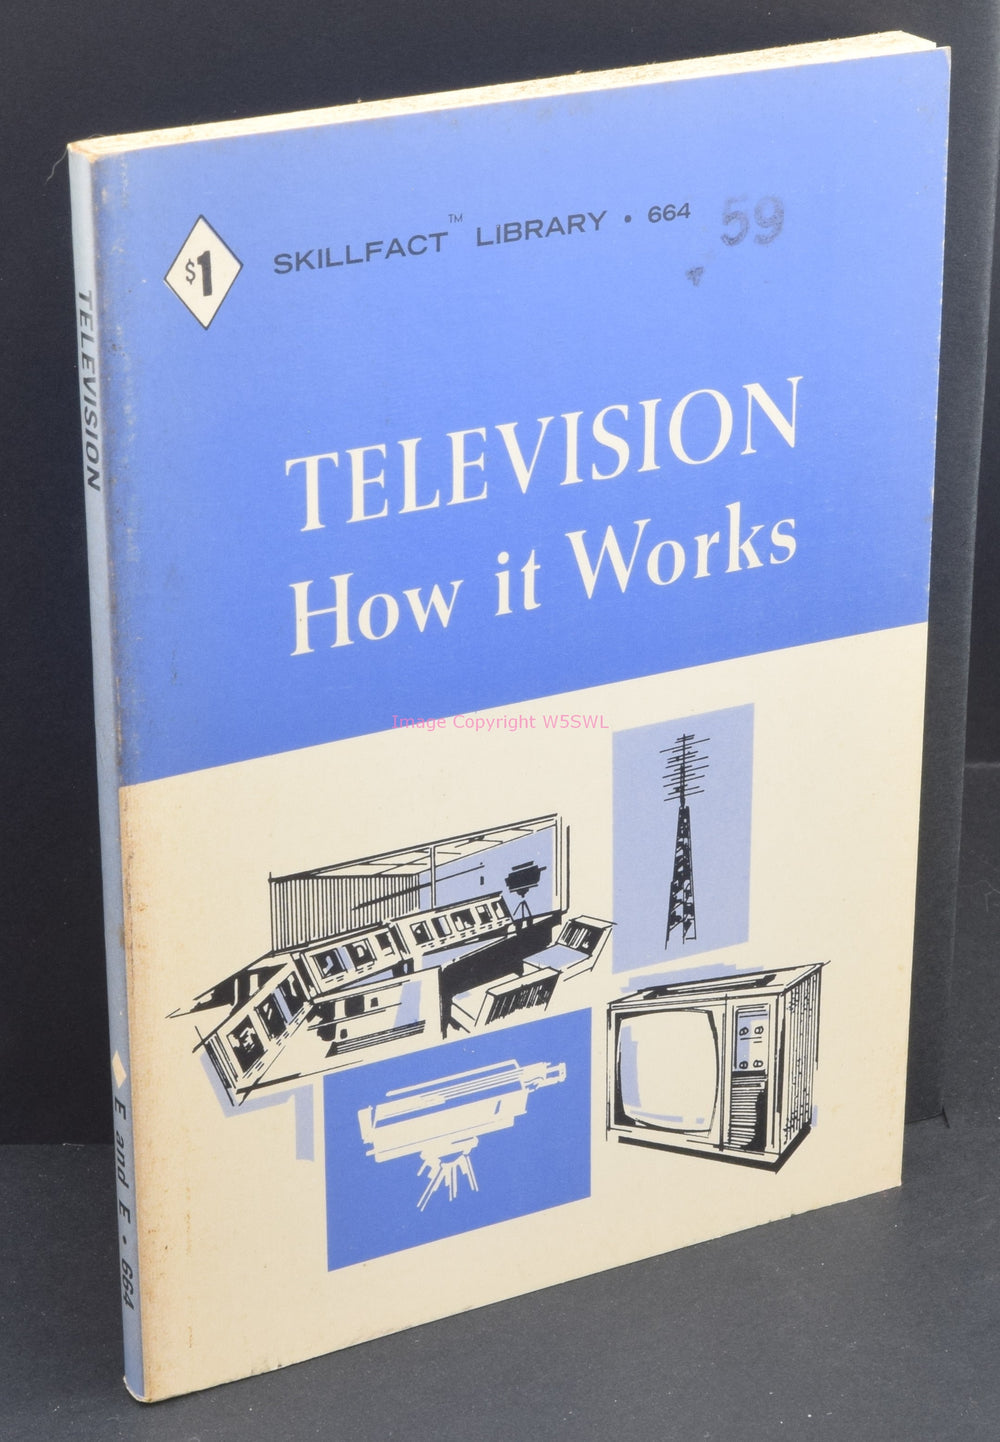 Television How It Works Skillfact Library 664 Editors And Engineers 1st Printing - Dave's Hobby Shop by W5SWL